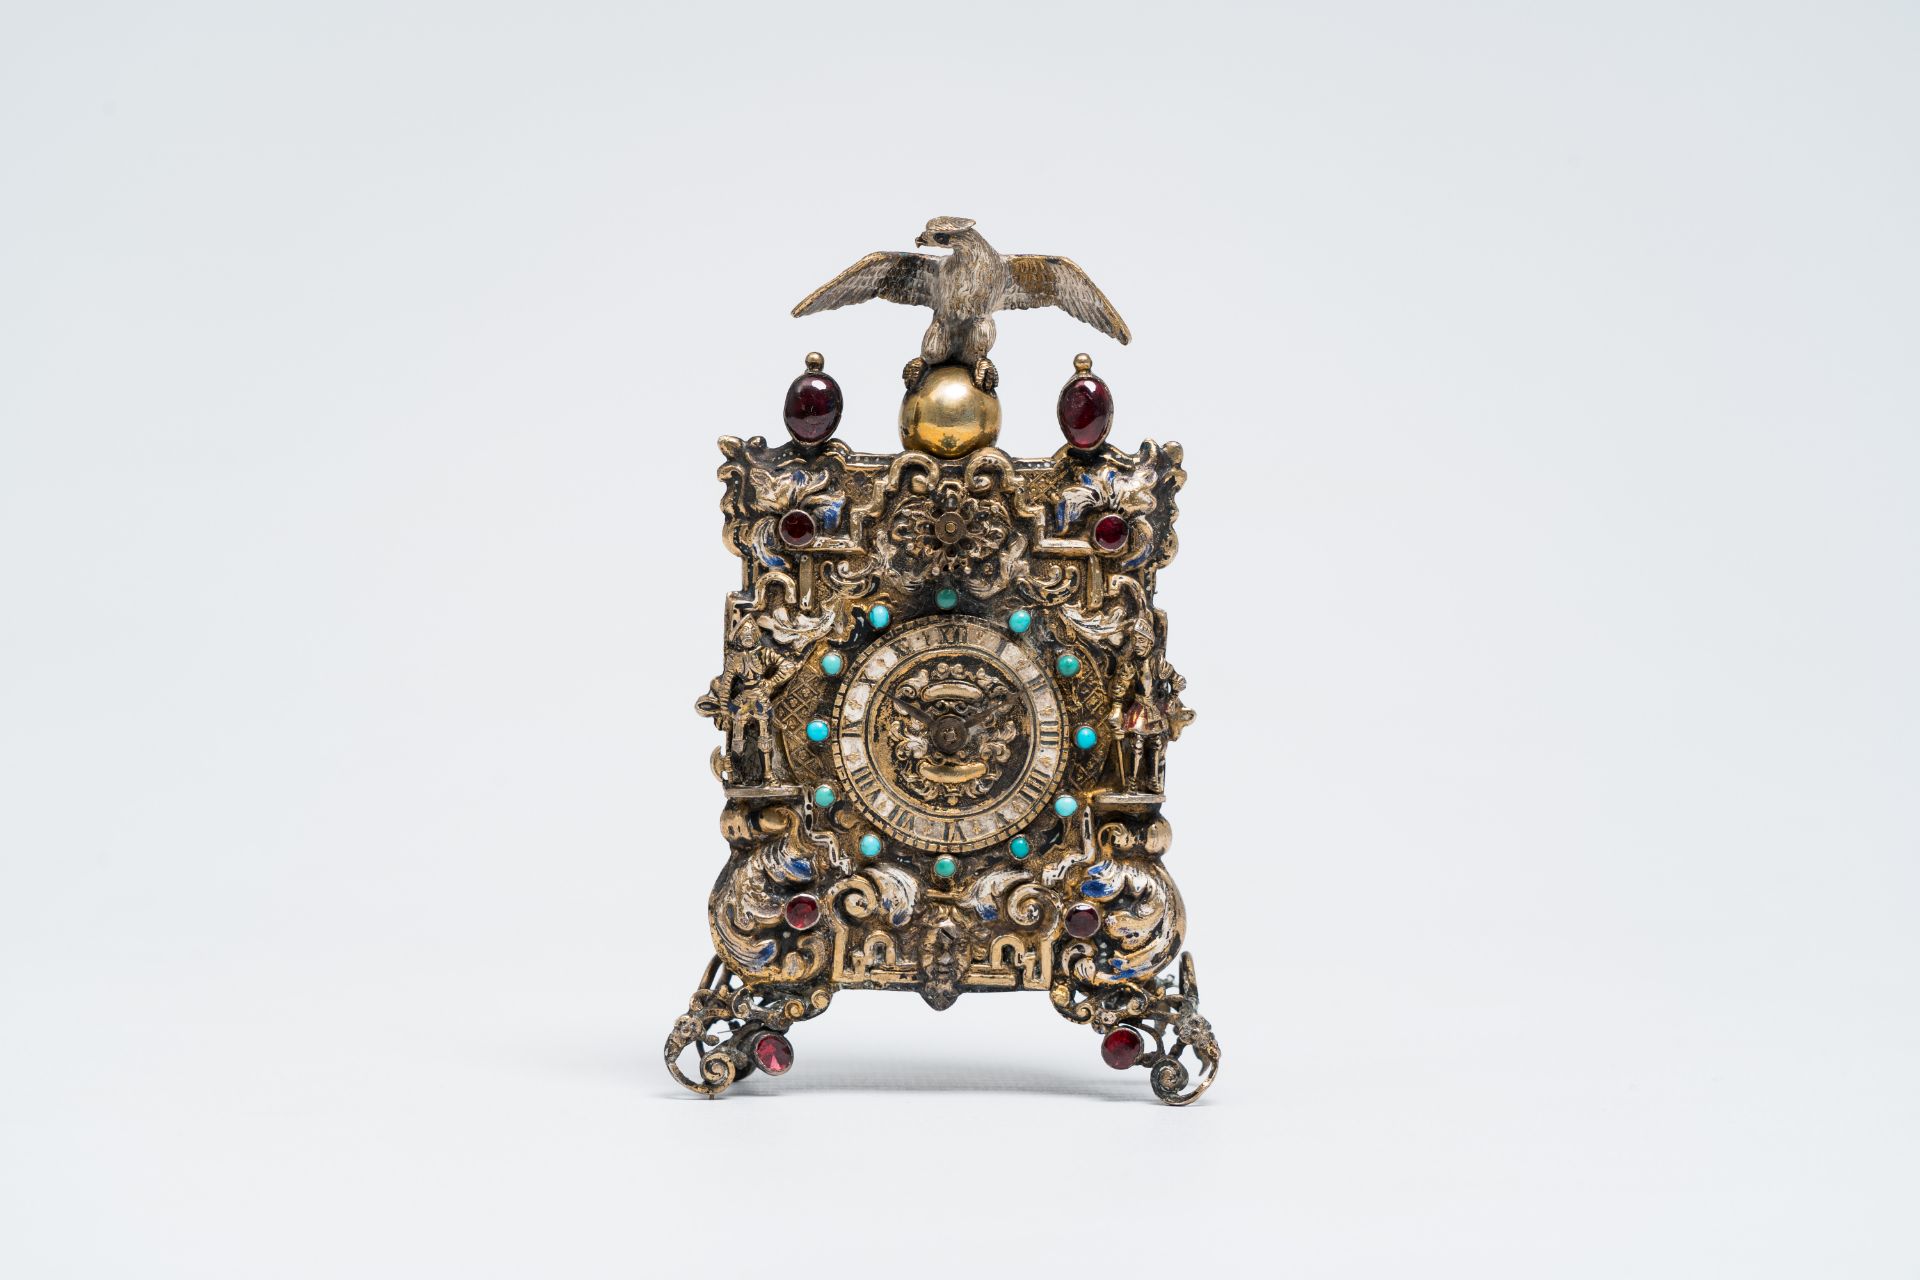 A gilt silver Baroque revival Viennese table clock crowned with an eagle and inlaid with turquoise, - Image 2 of 11